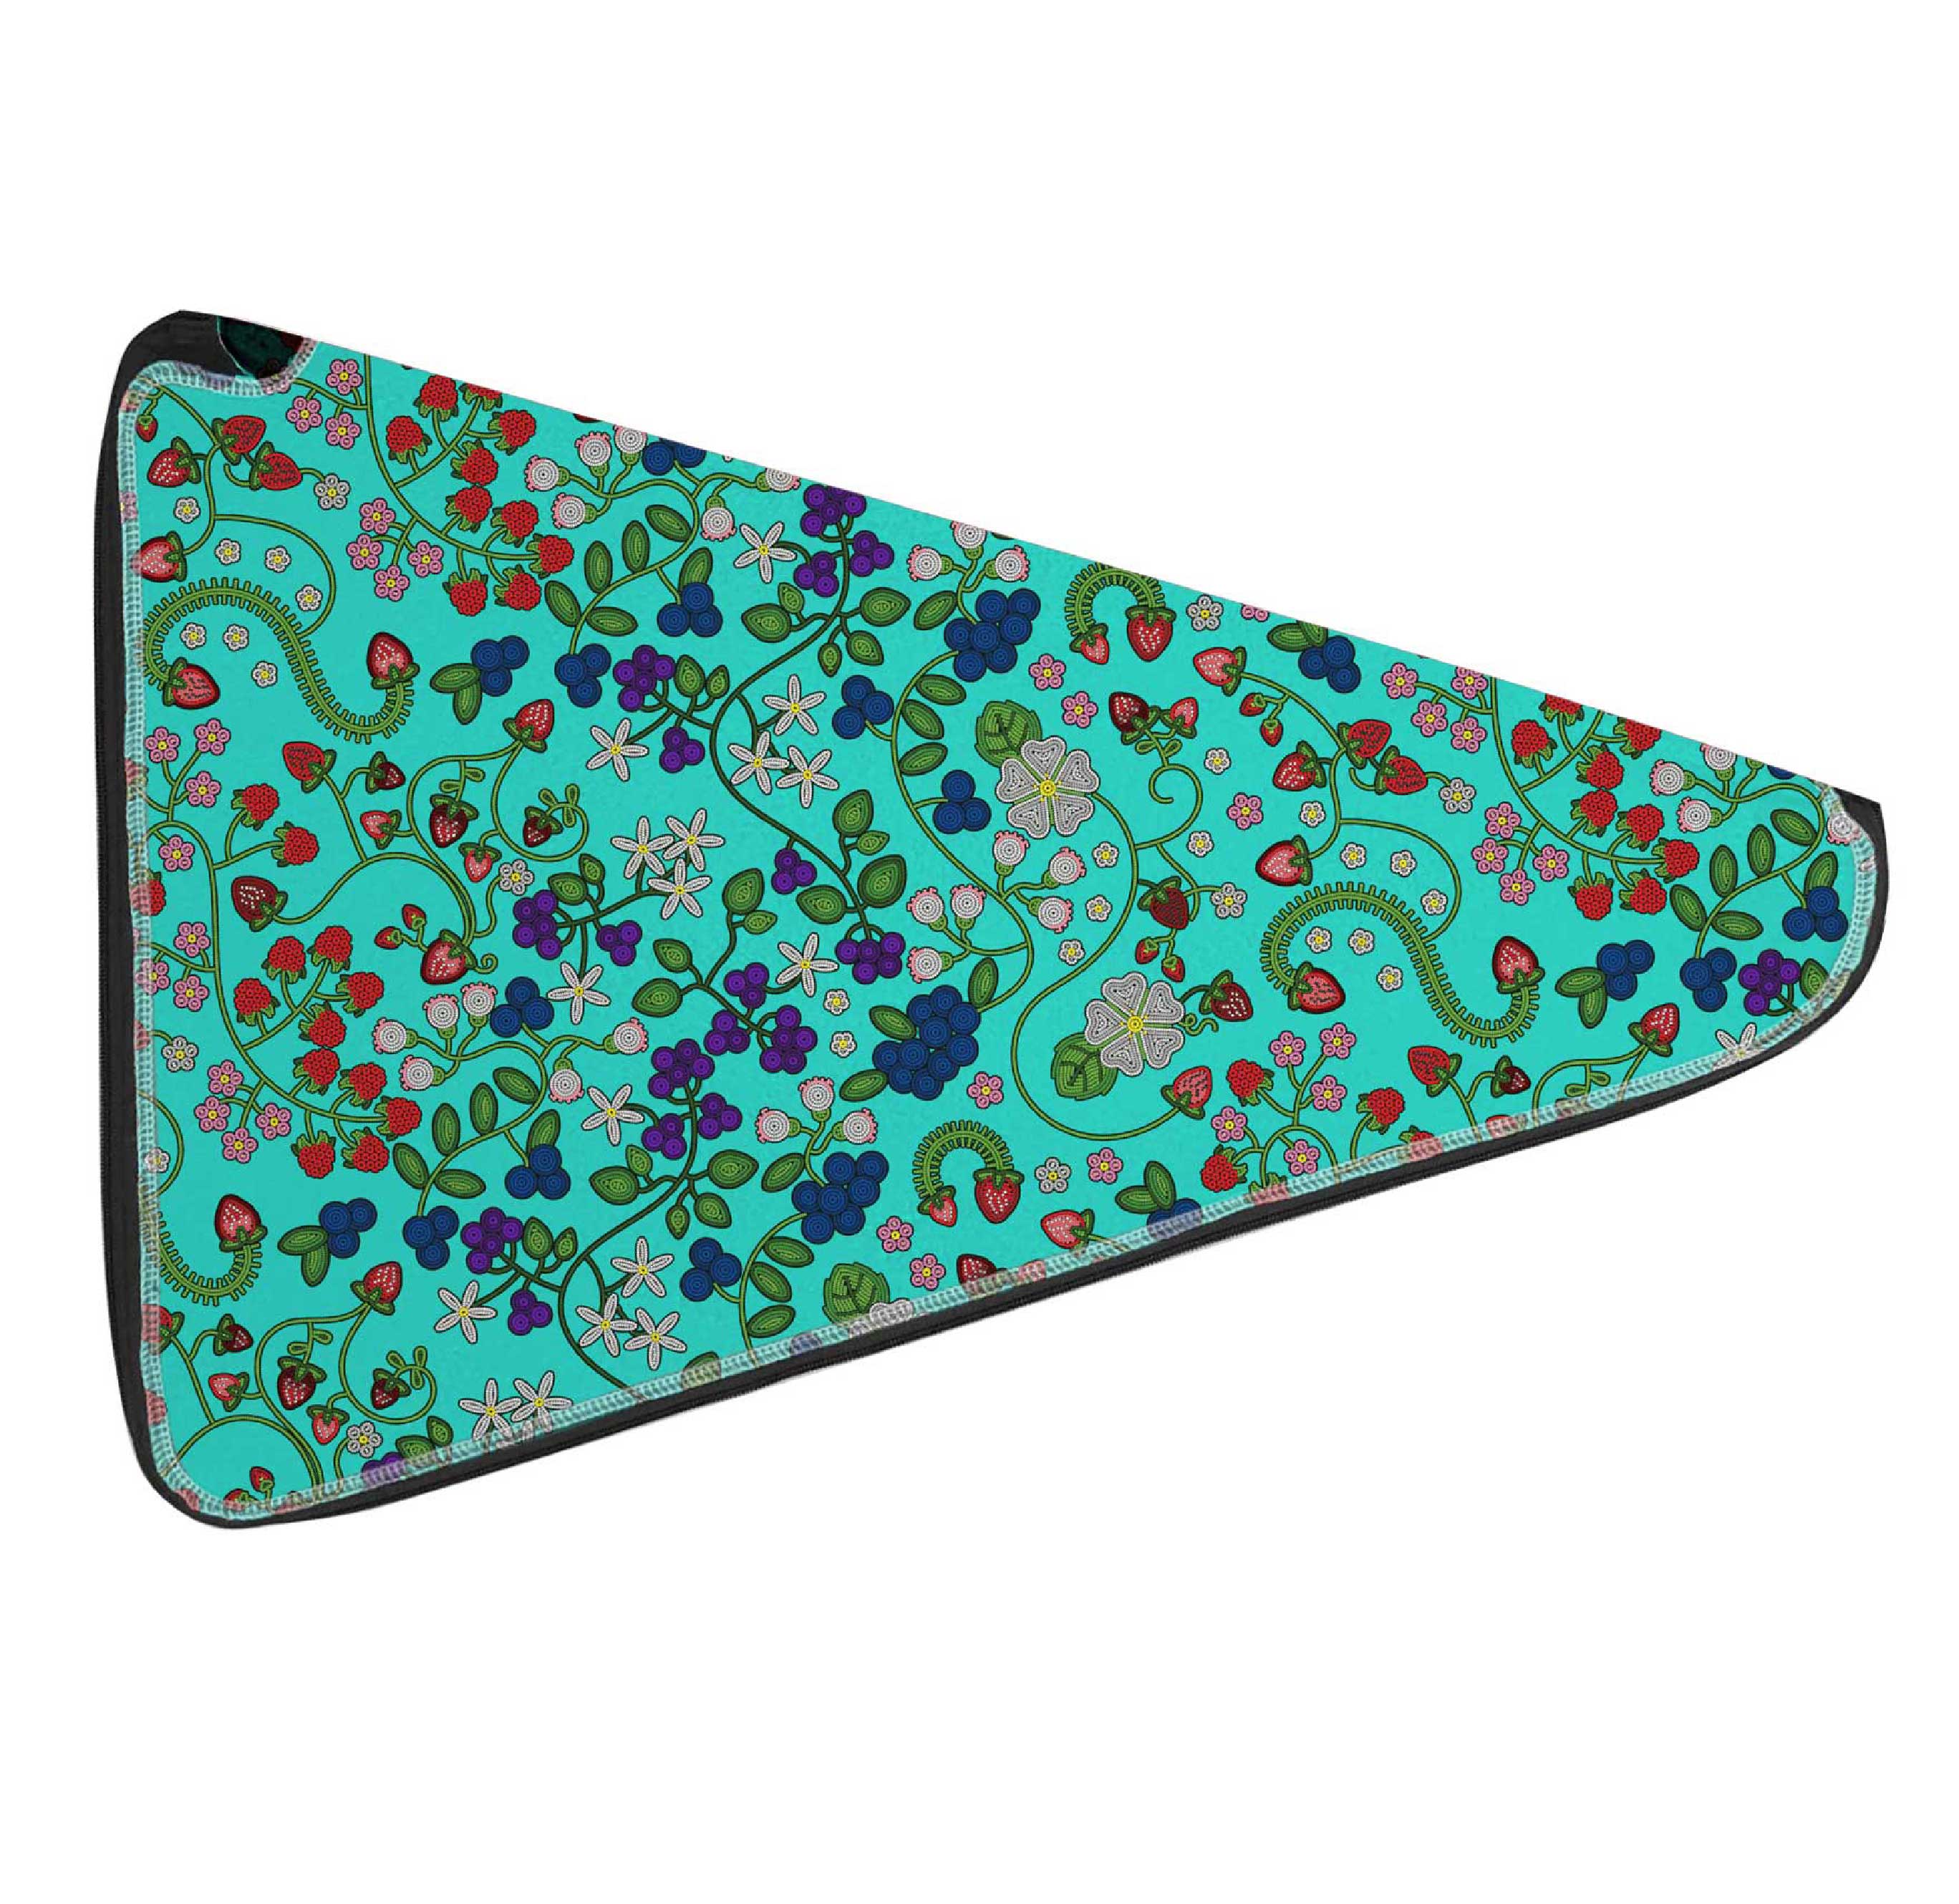 27 Inch Fan Case - Grandmother's Stories Turquoise